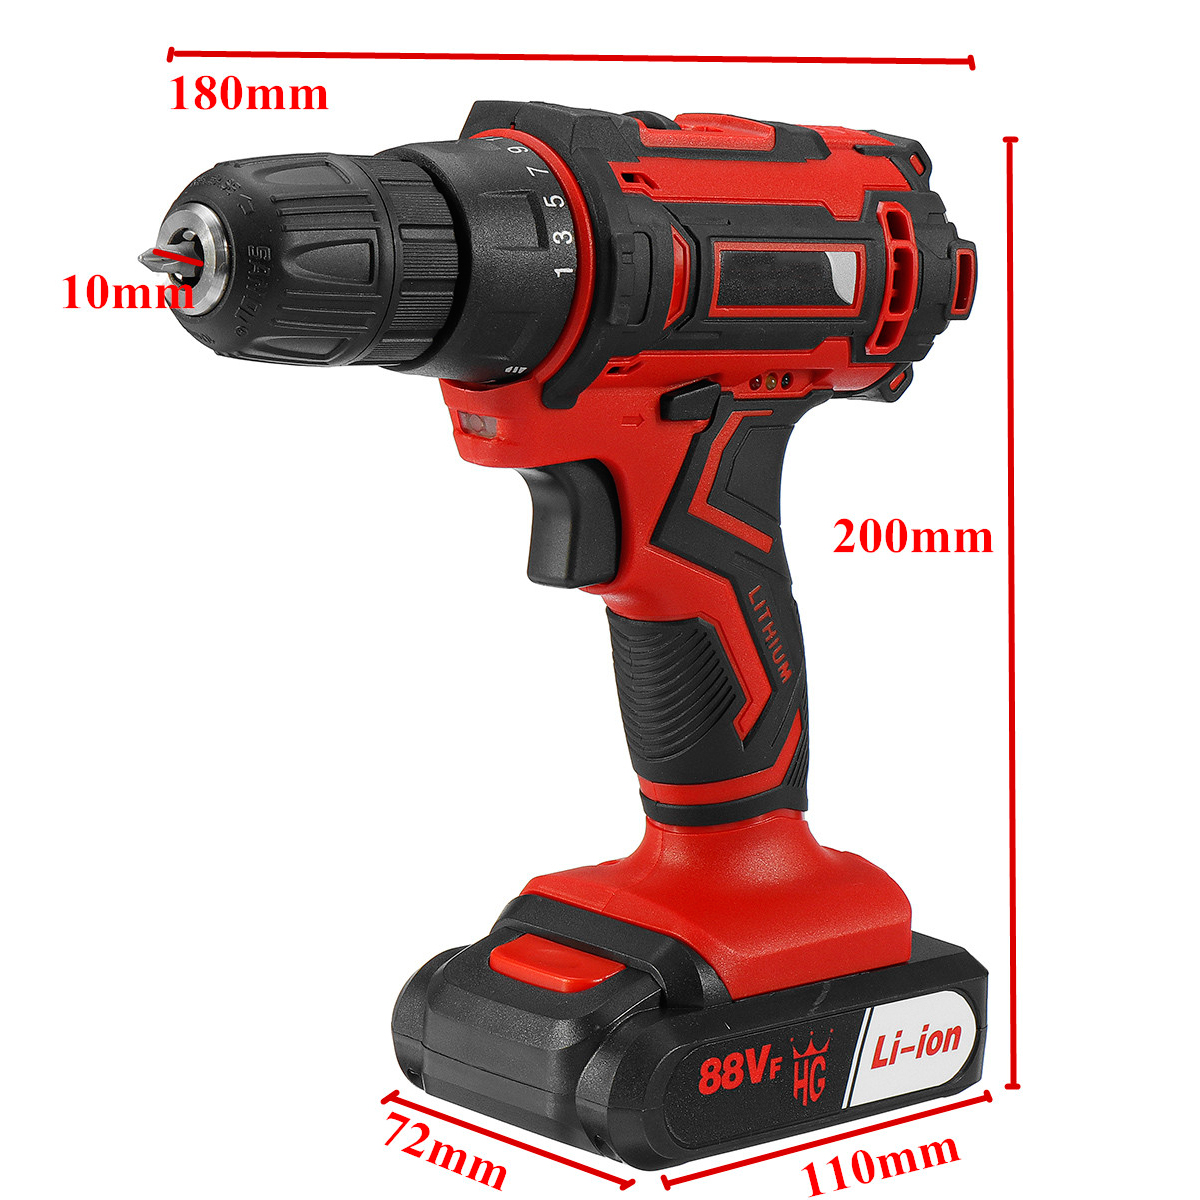 88VF-Cordless-Electric-Drill-Driver-251-Gears-Rechargeable-Screwdriver-W-12pcs-Battery--LED-Working--1847800-8